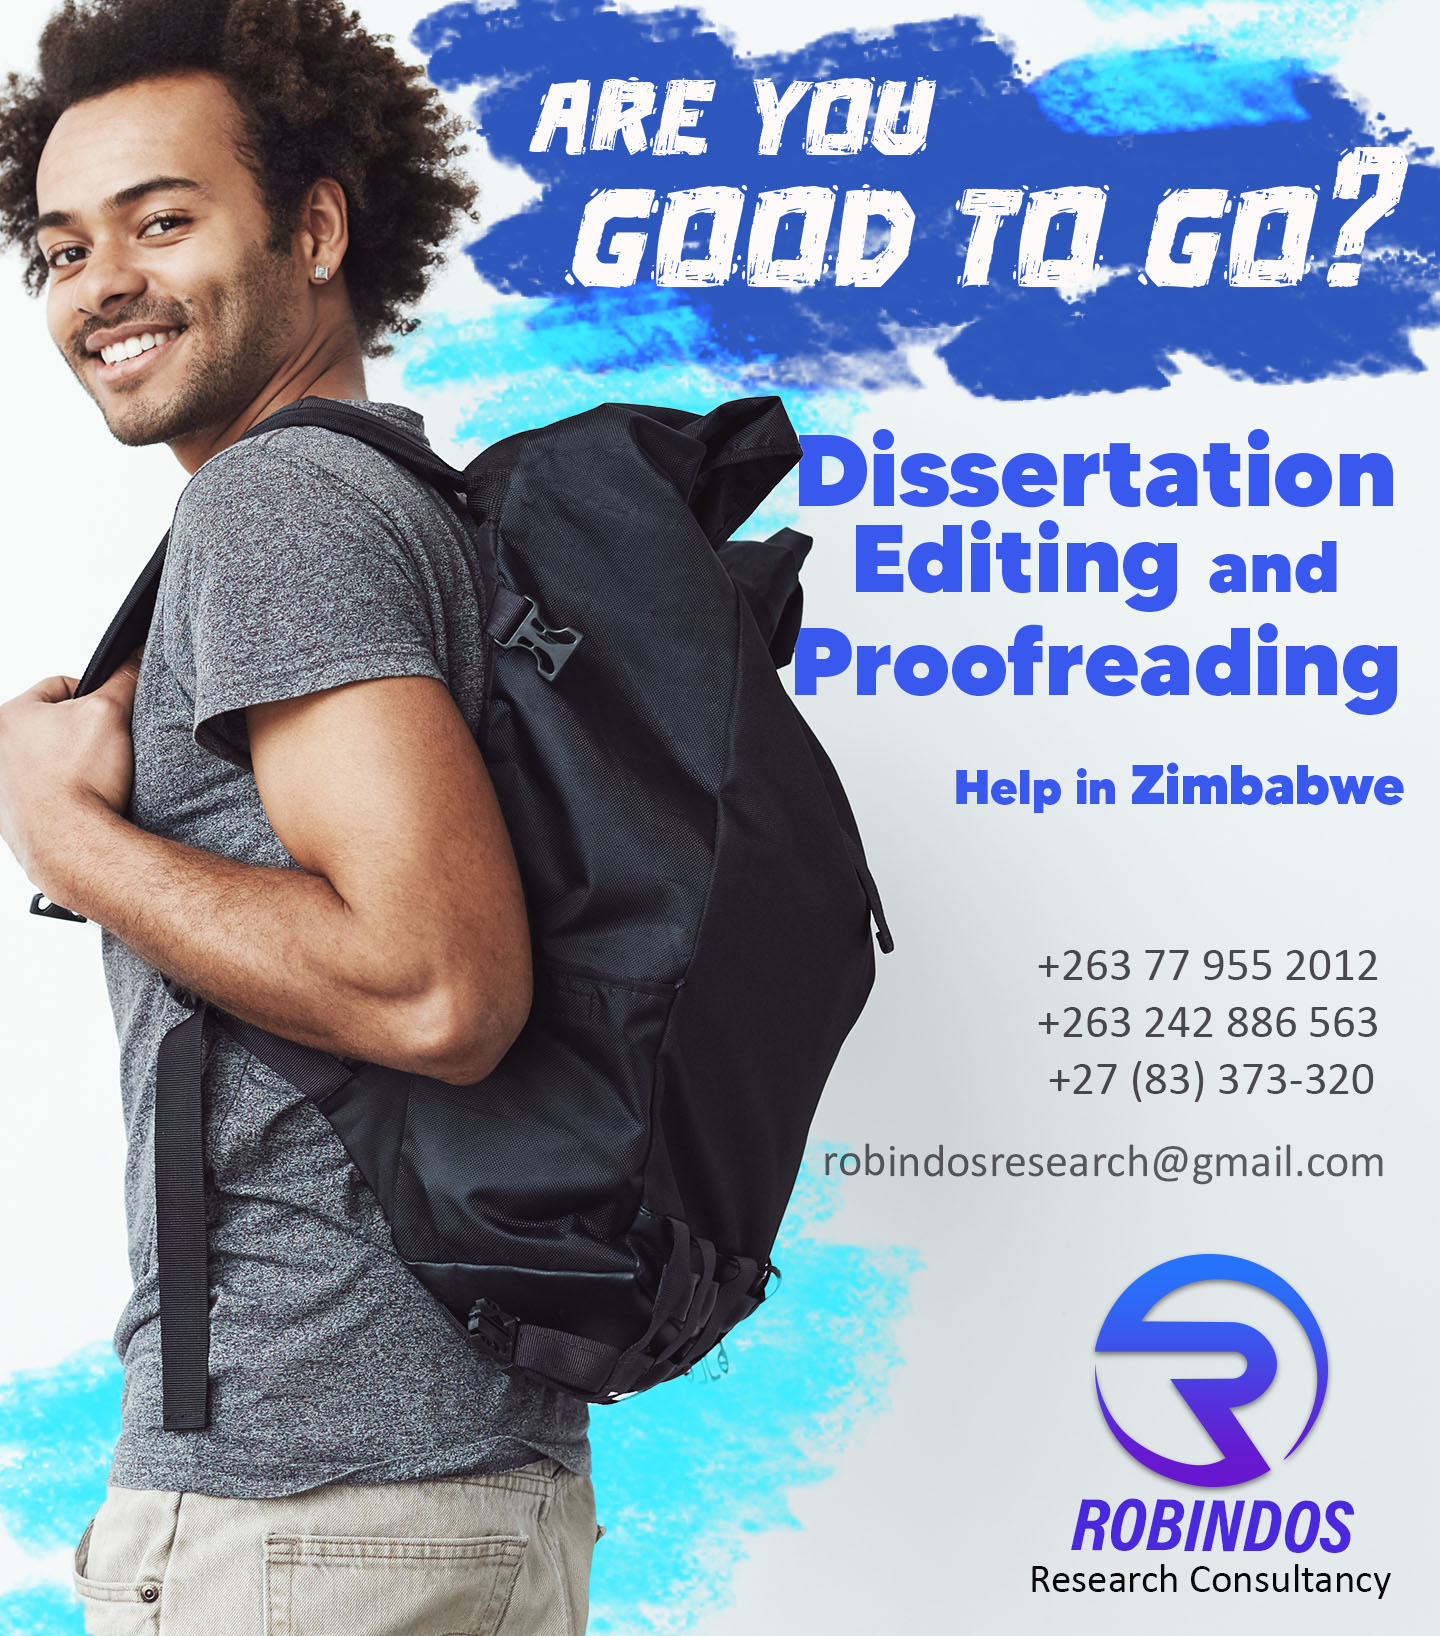 research consultancy dessetation EDITING AND PROOFREADING 1